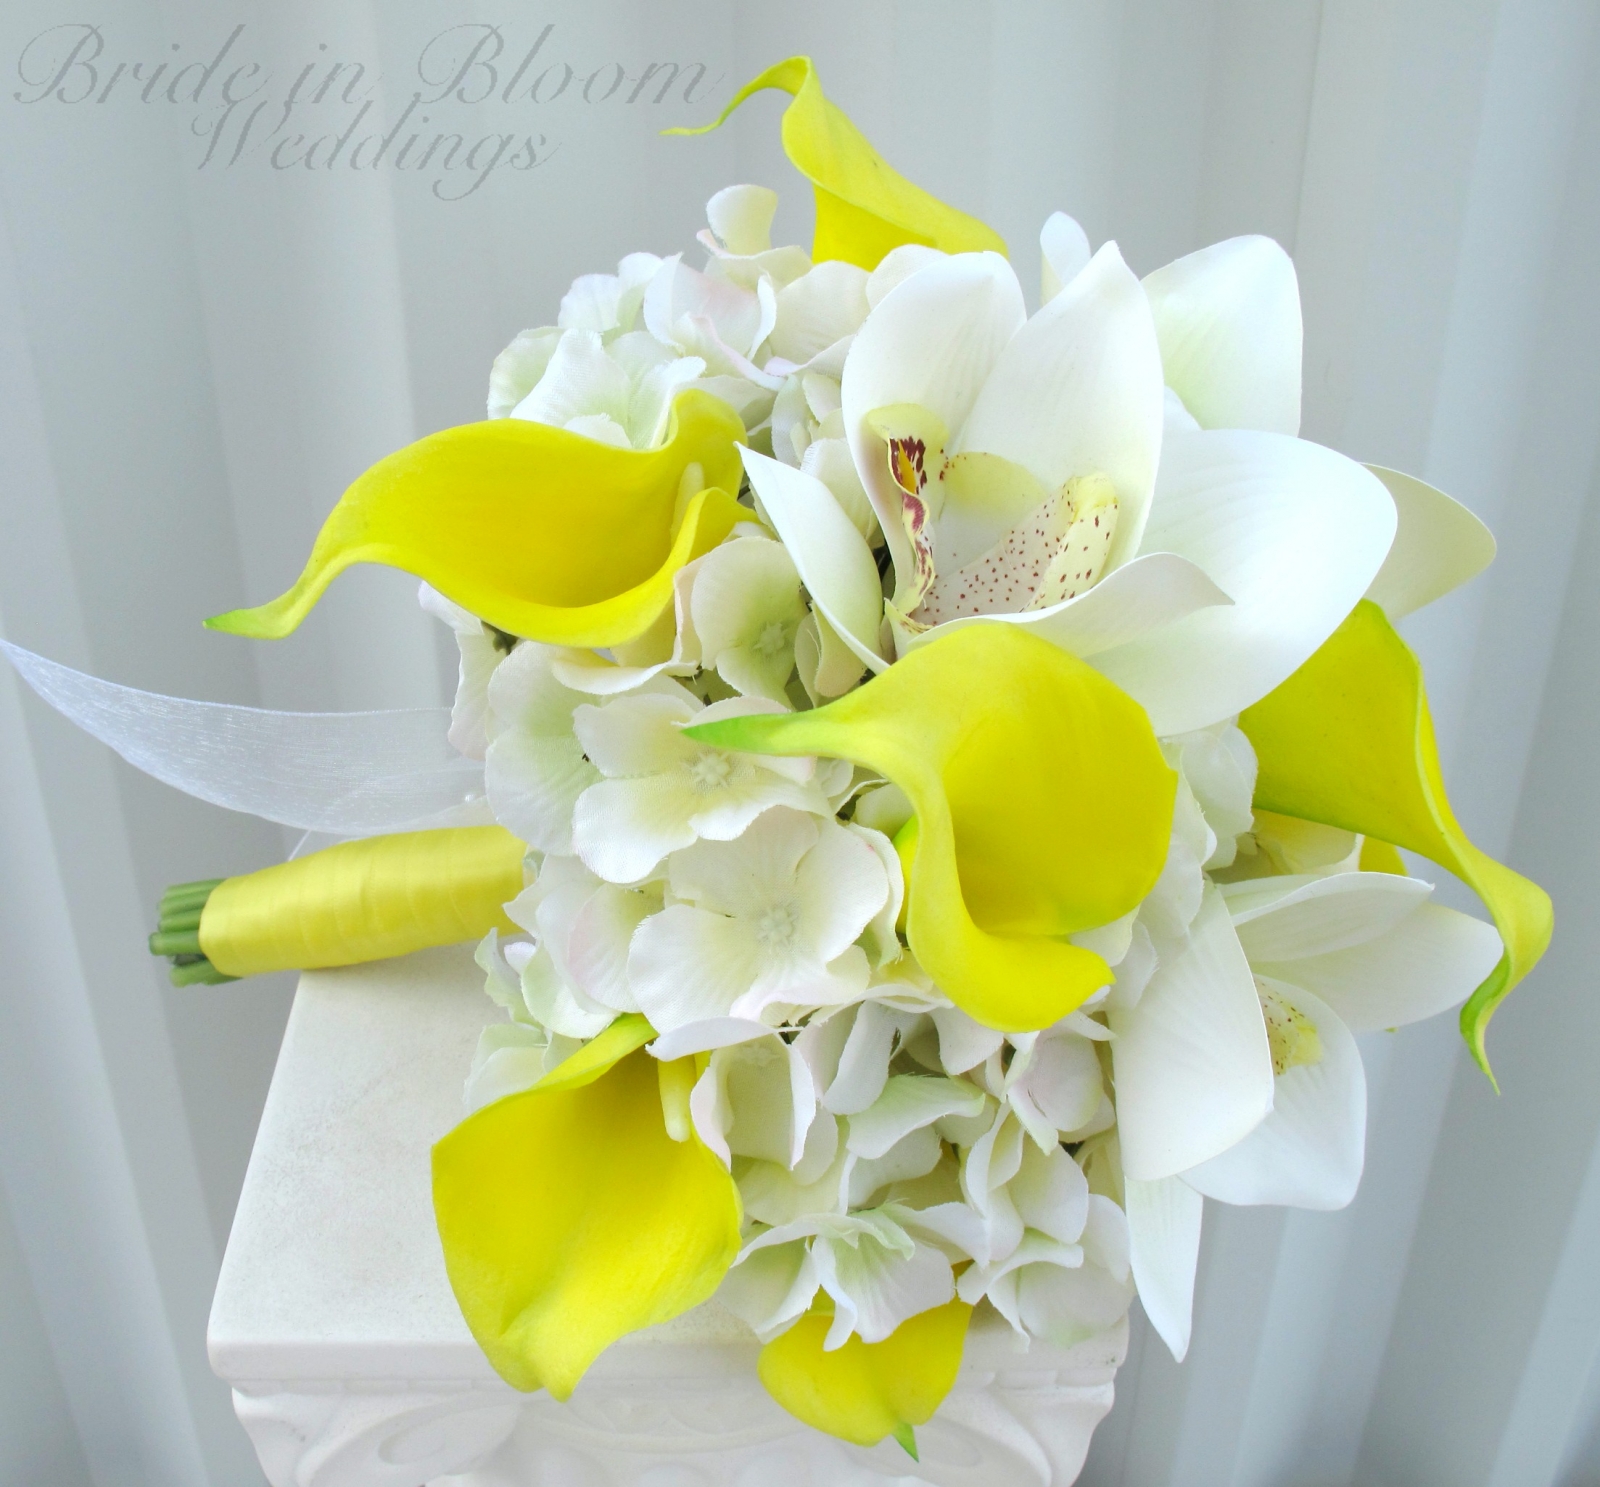 Yellow calla lily orchid wedding bouquet | Bride in Bloom